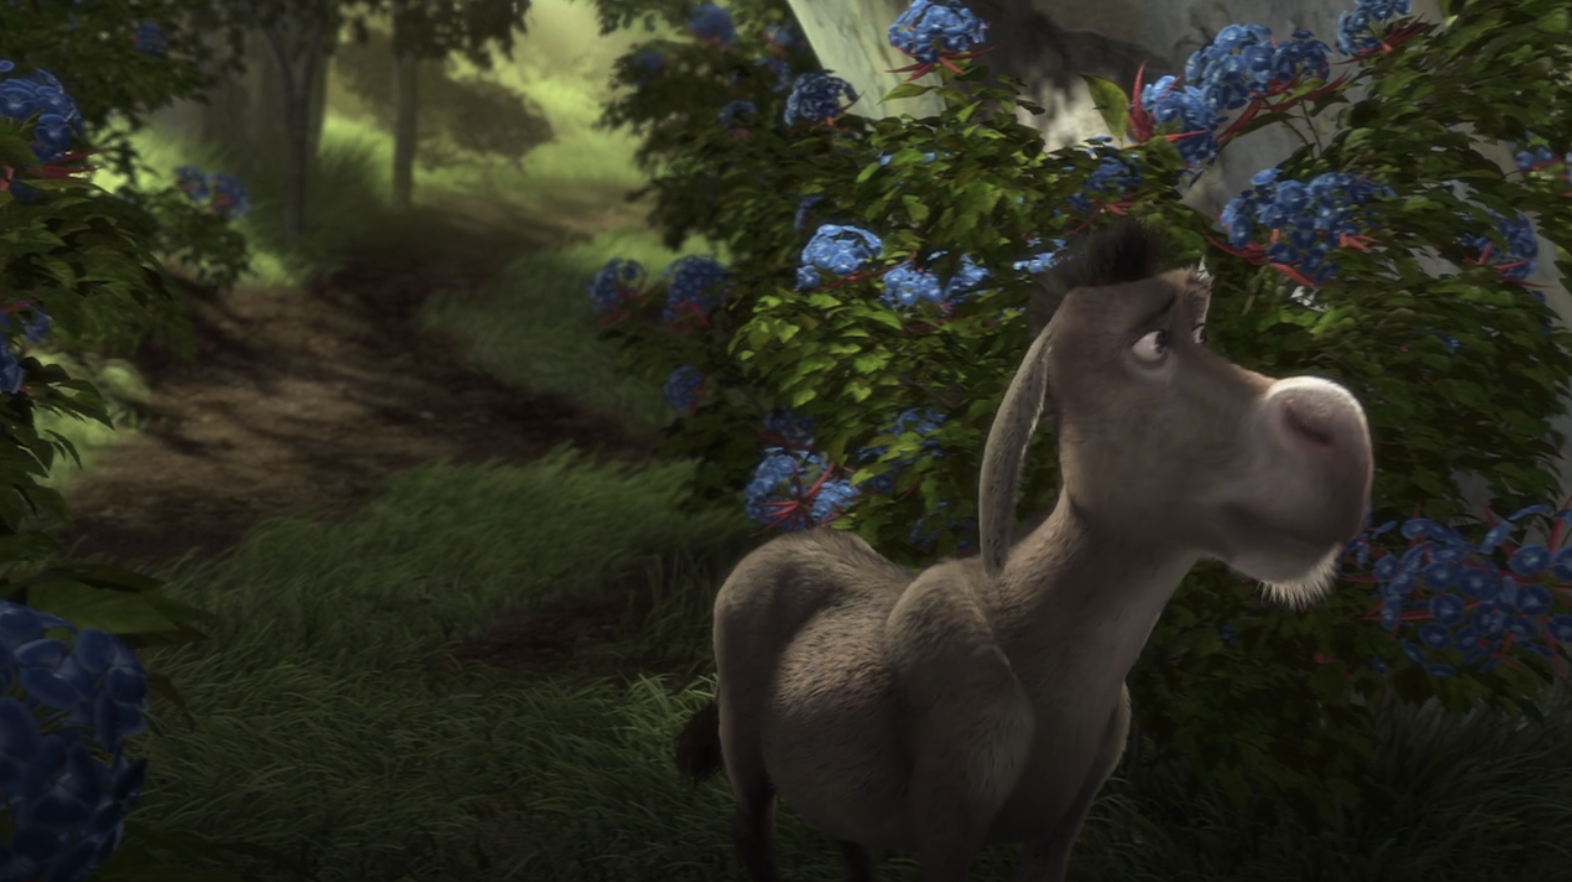 Donkey looking in a field of blue flowers and red thorns  